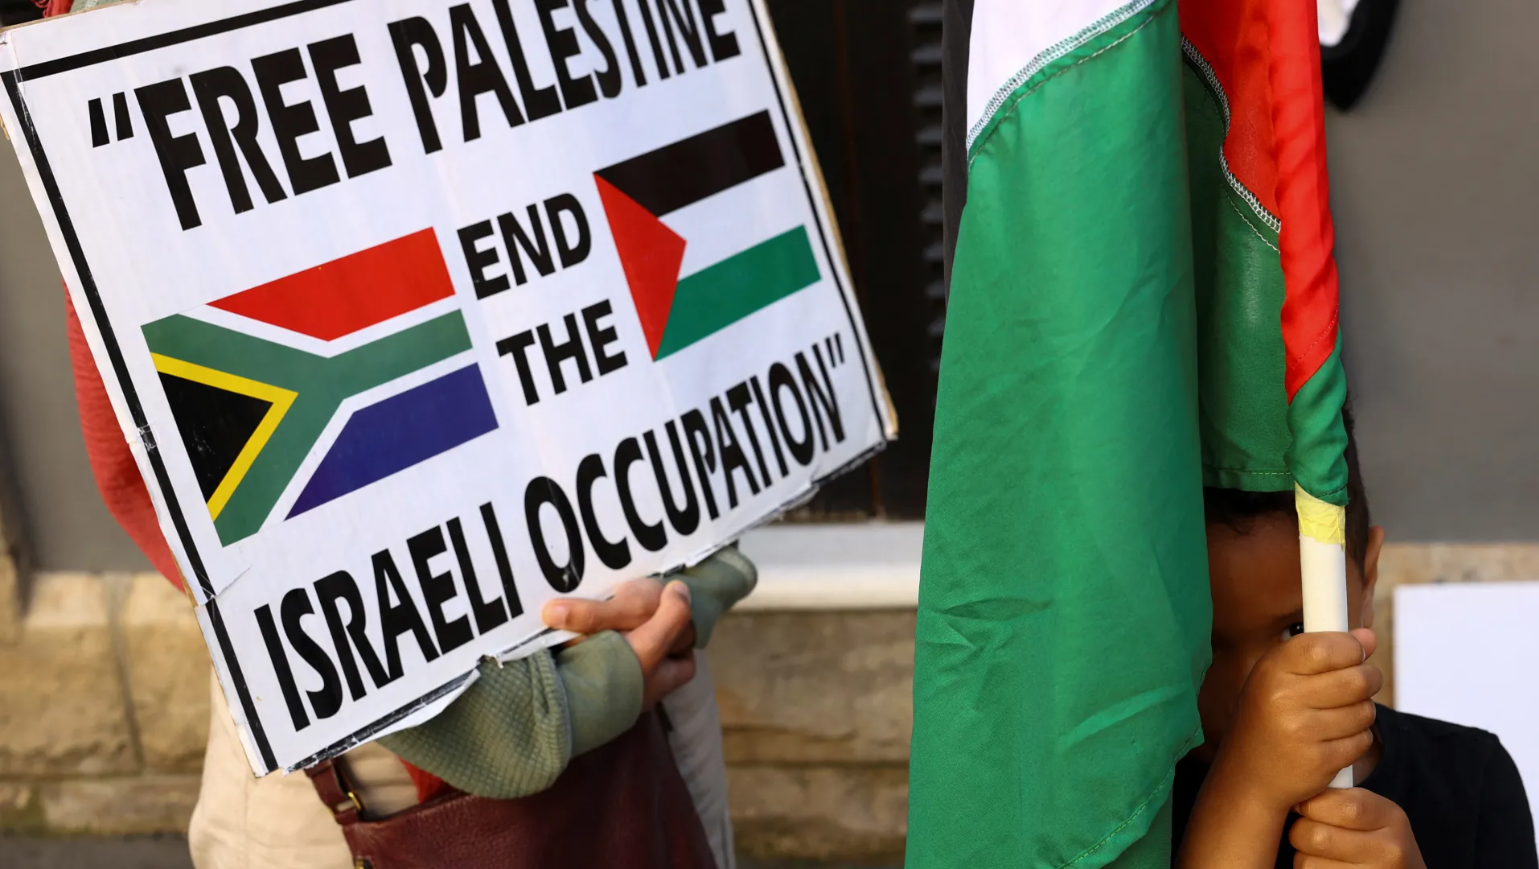 Arab human rights organizations and civil society call on member states of the Human Rights Council to join South Africa in the genocide lawsuit against Israel.